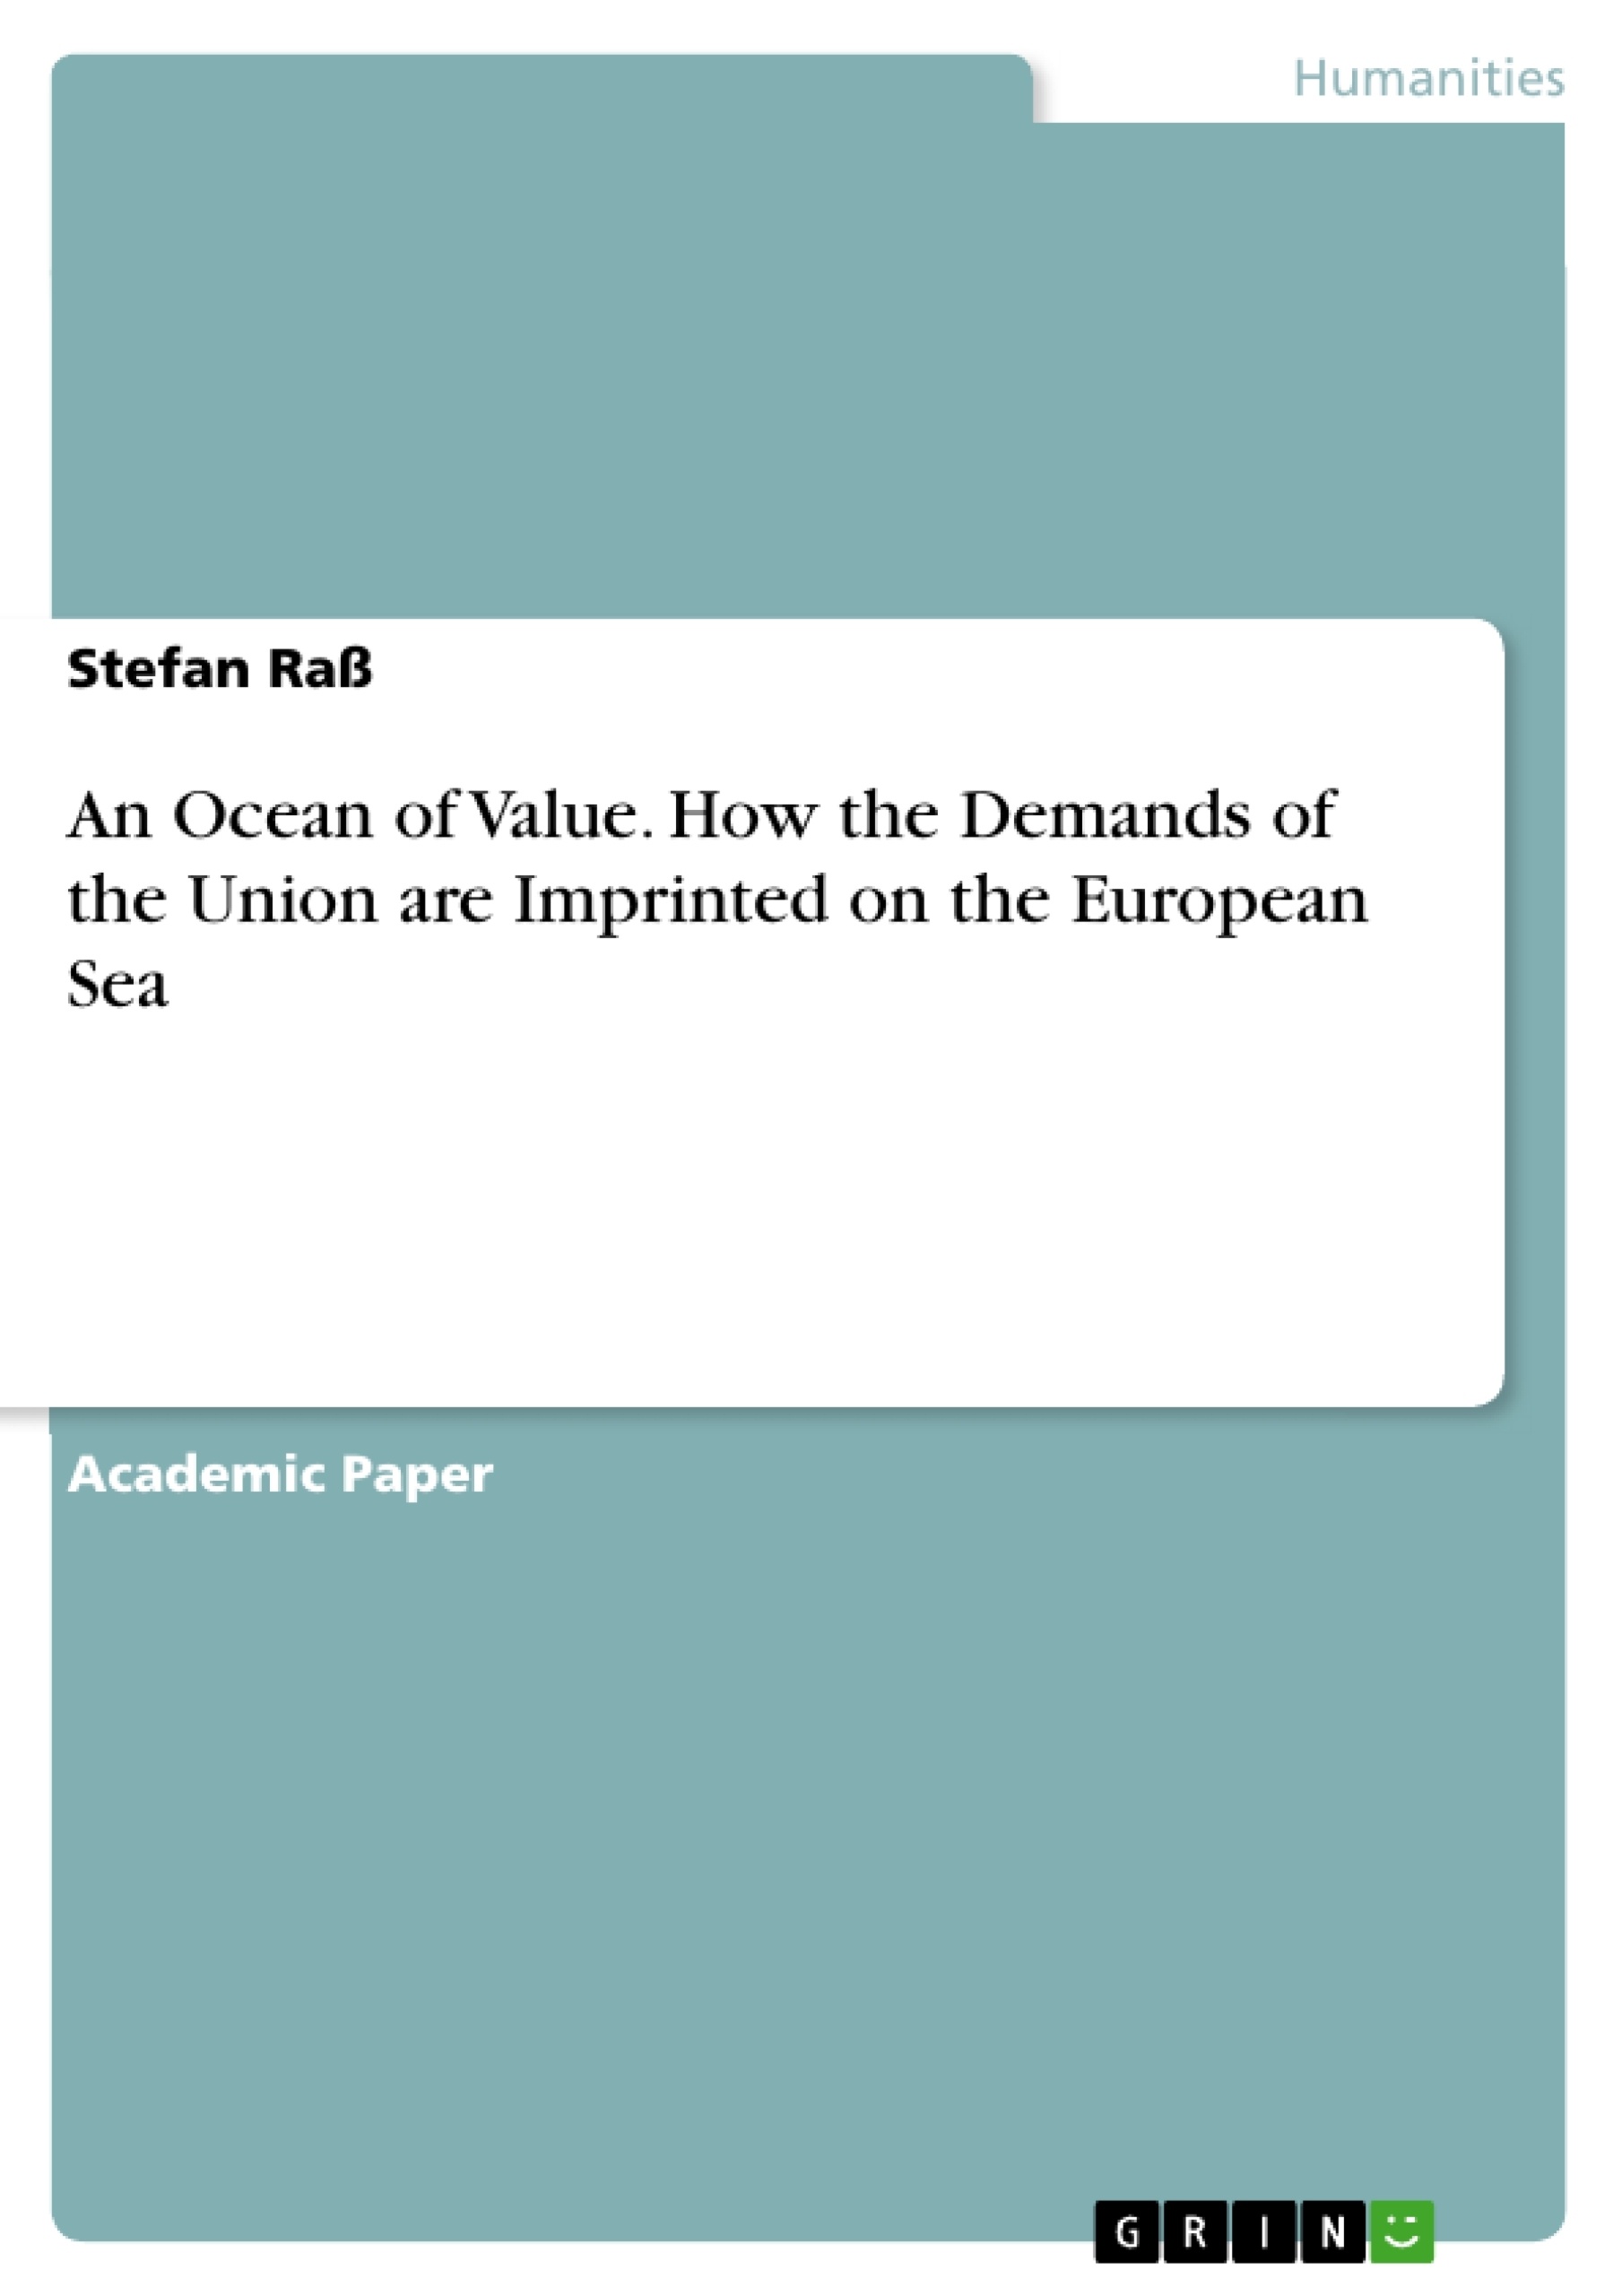 Title: An Ocean of Value. How the Demands of the Union are Imprinted on the European Sea